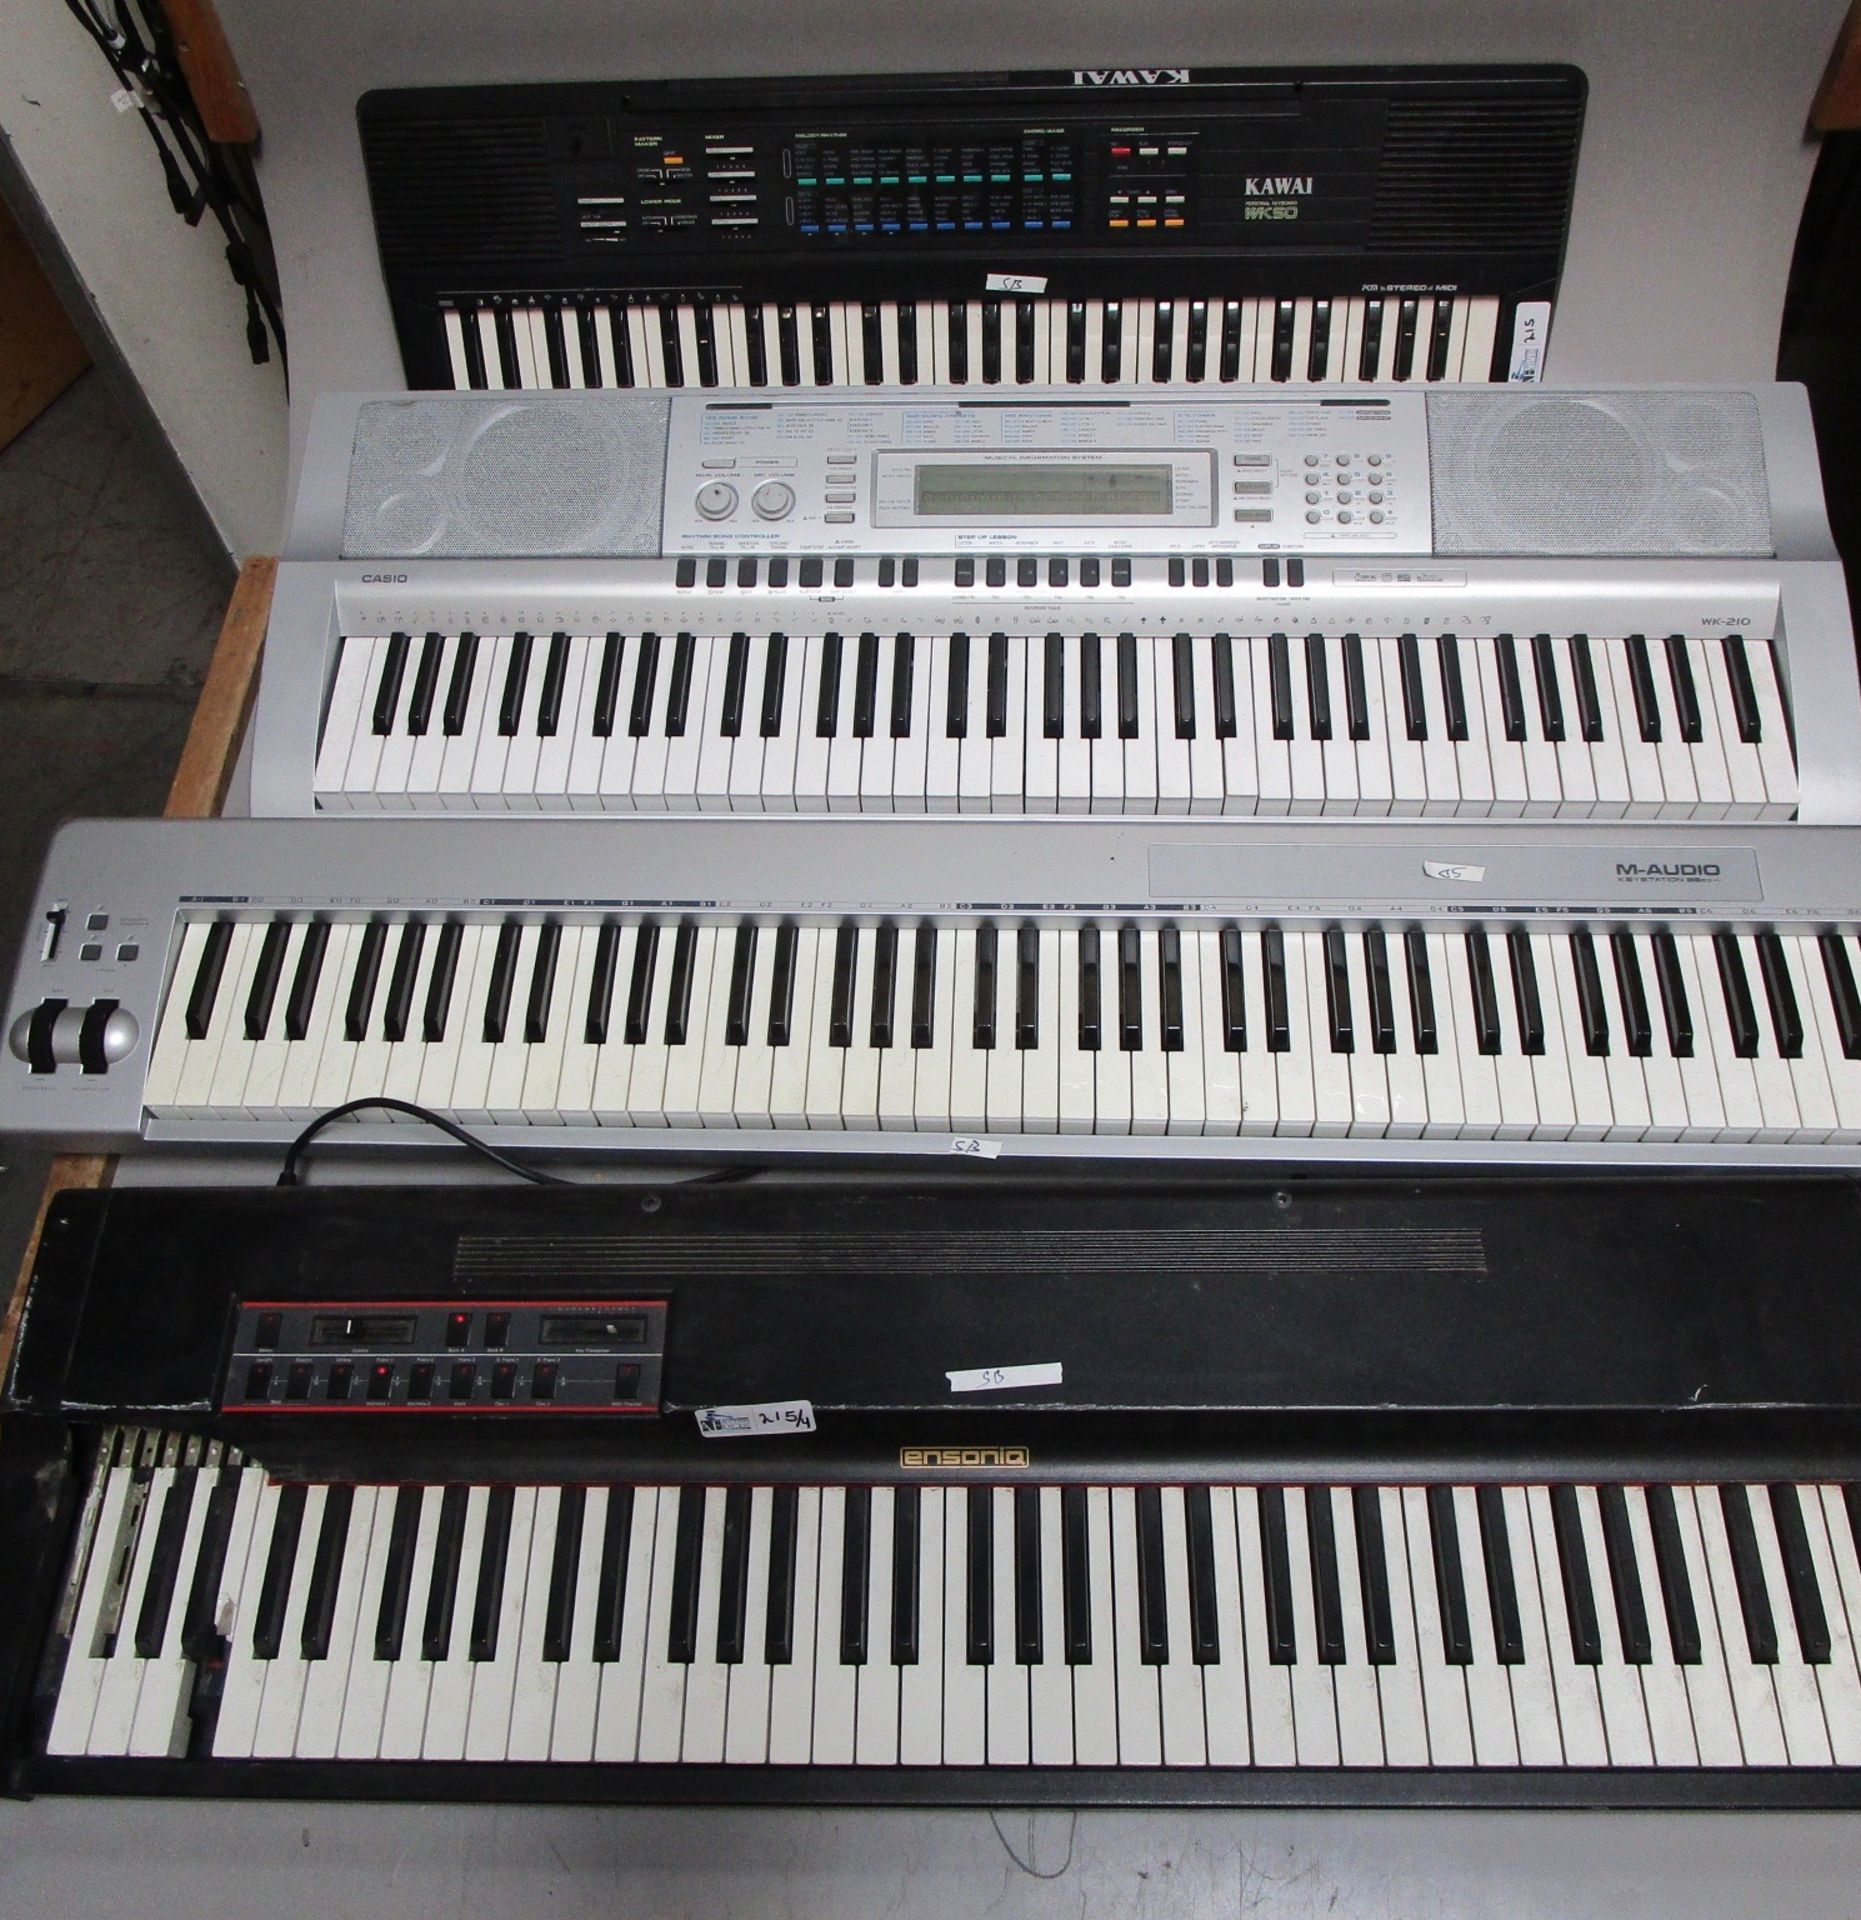 LOT OF 4 KEYBOARDS